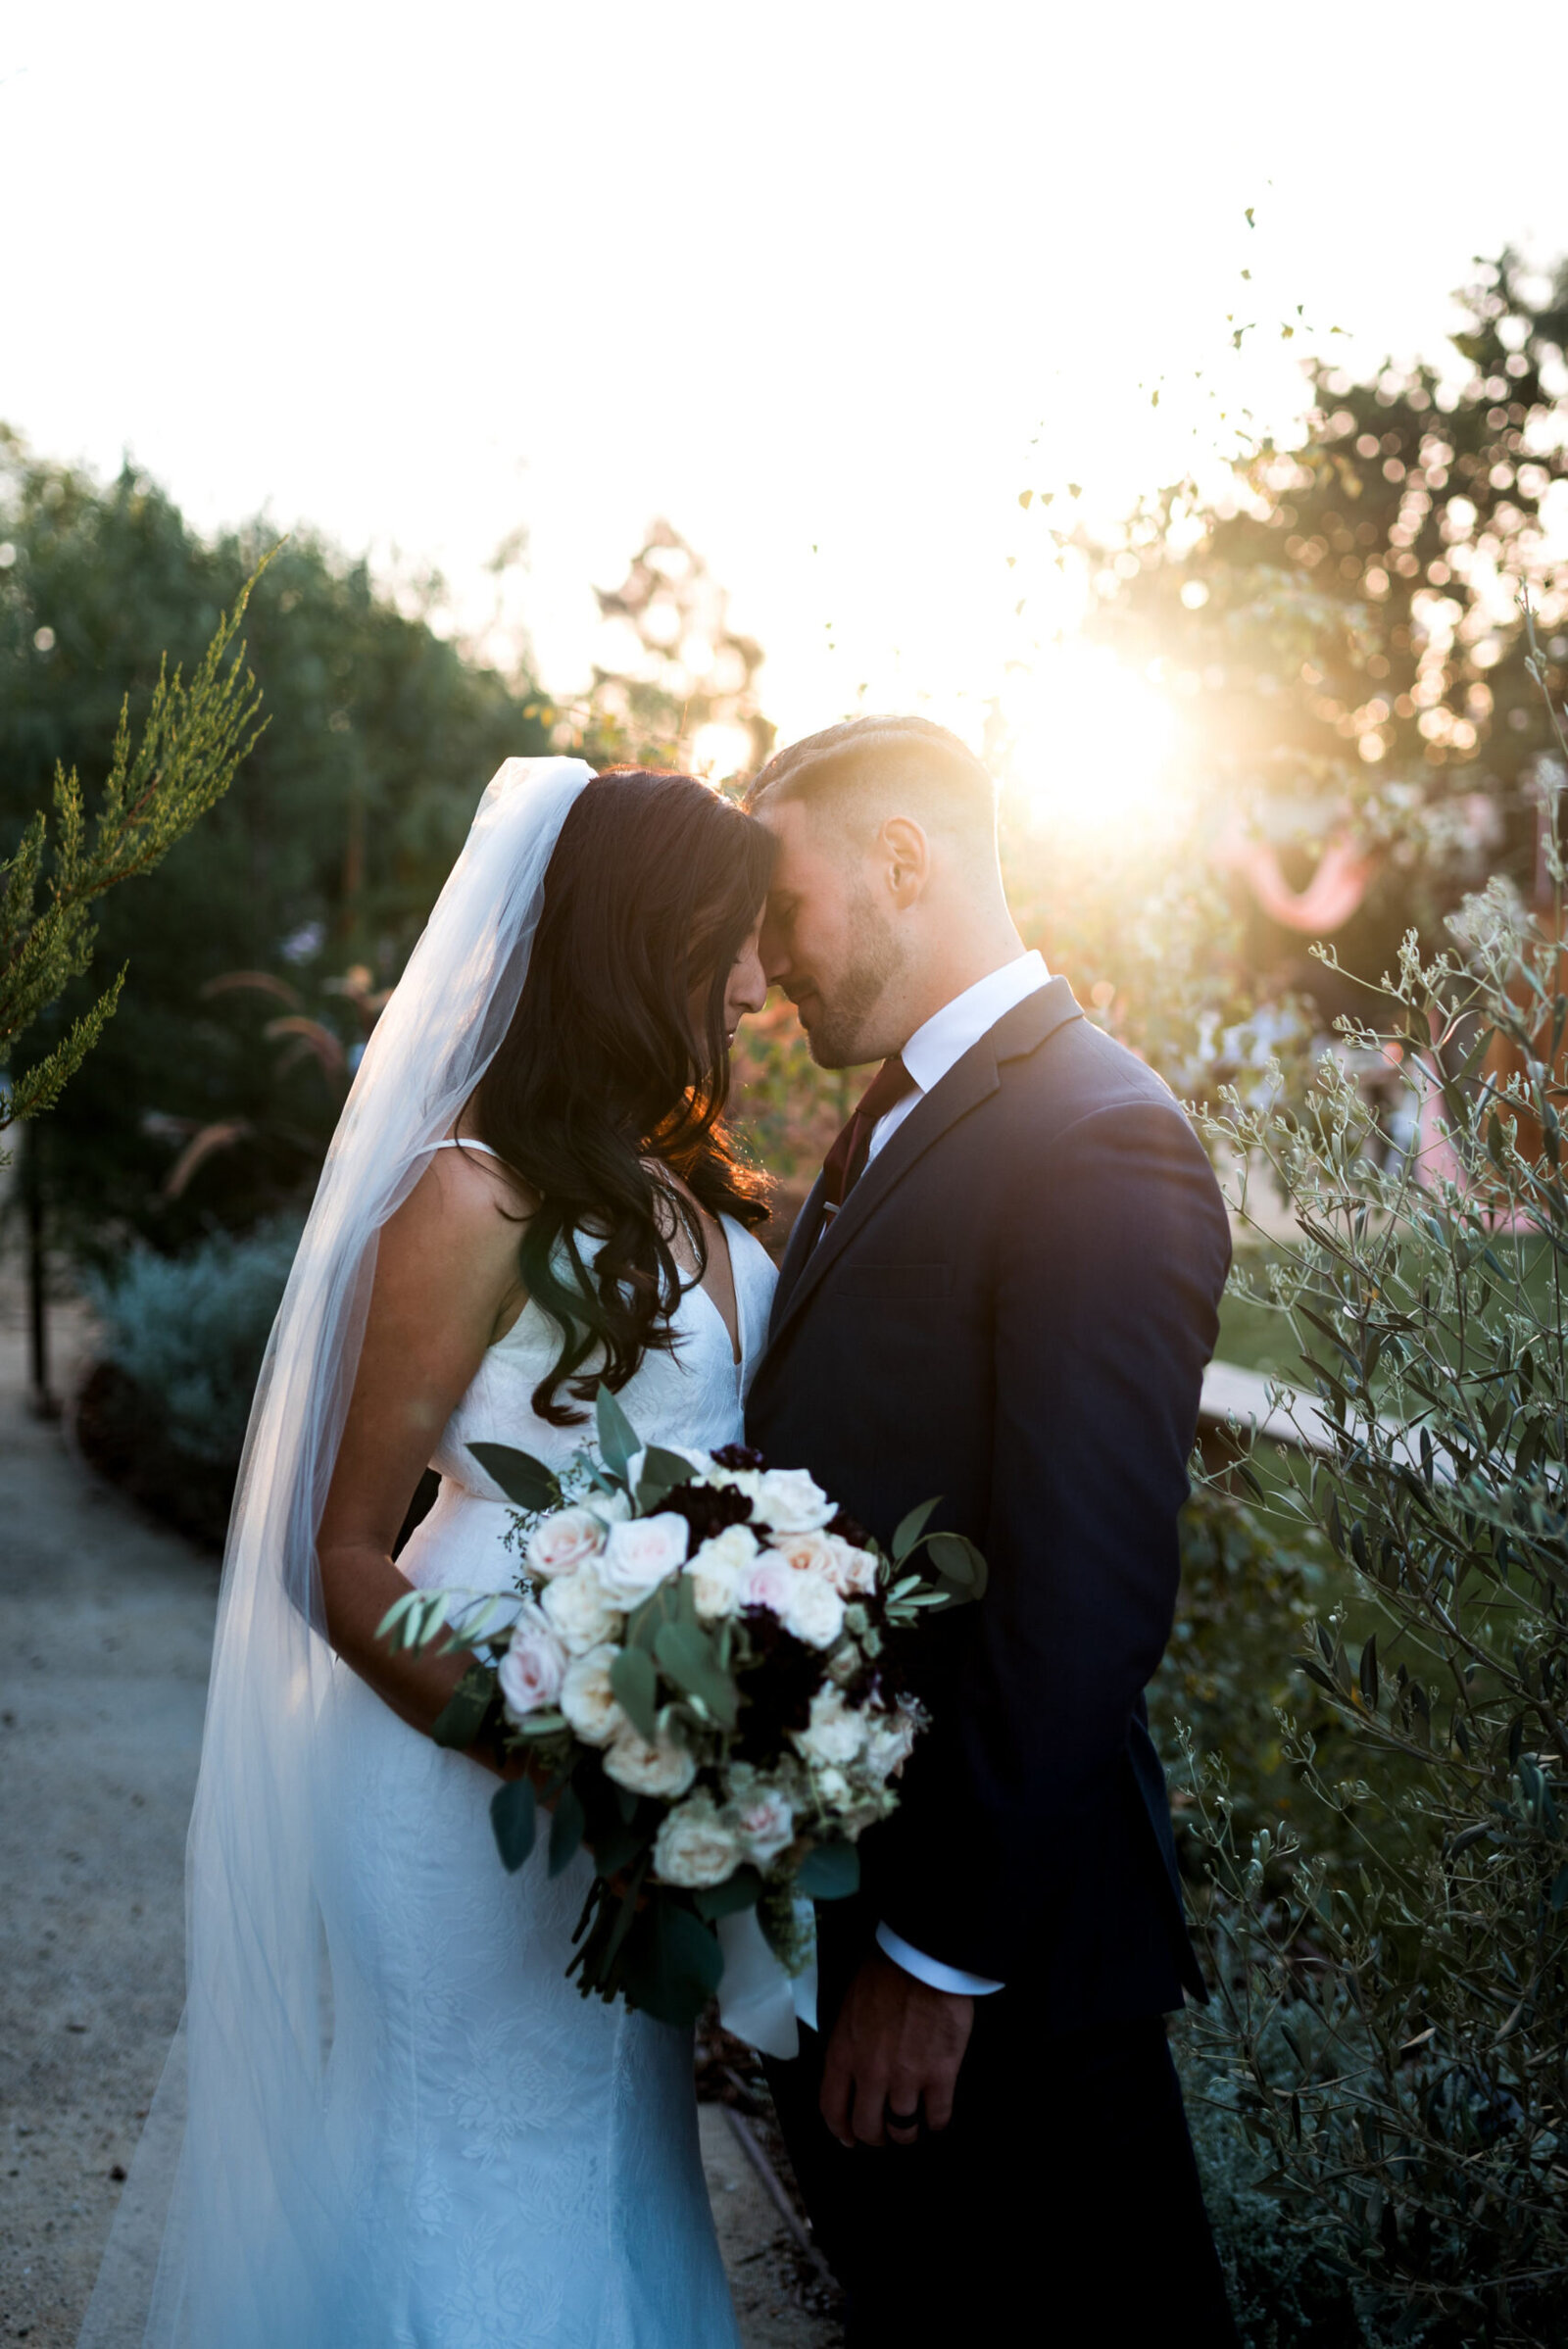 Wedding couple with faces touching, smiling with eyes closed, with the sun setting in the background, taken by Winnipeg Wedding Photographer, Kyle Cottrell.